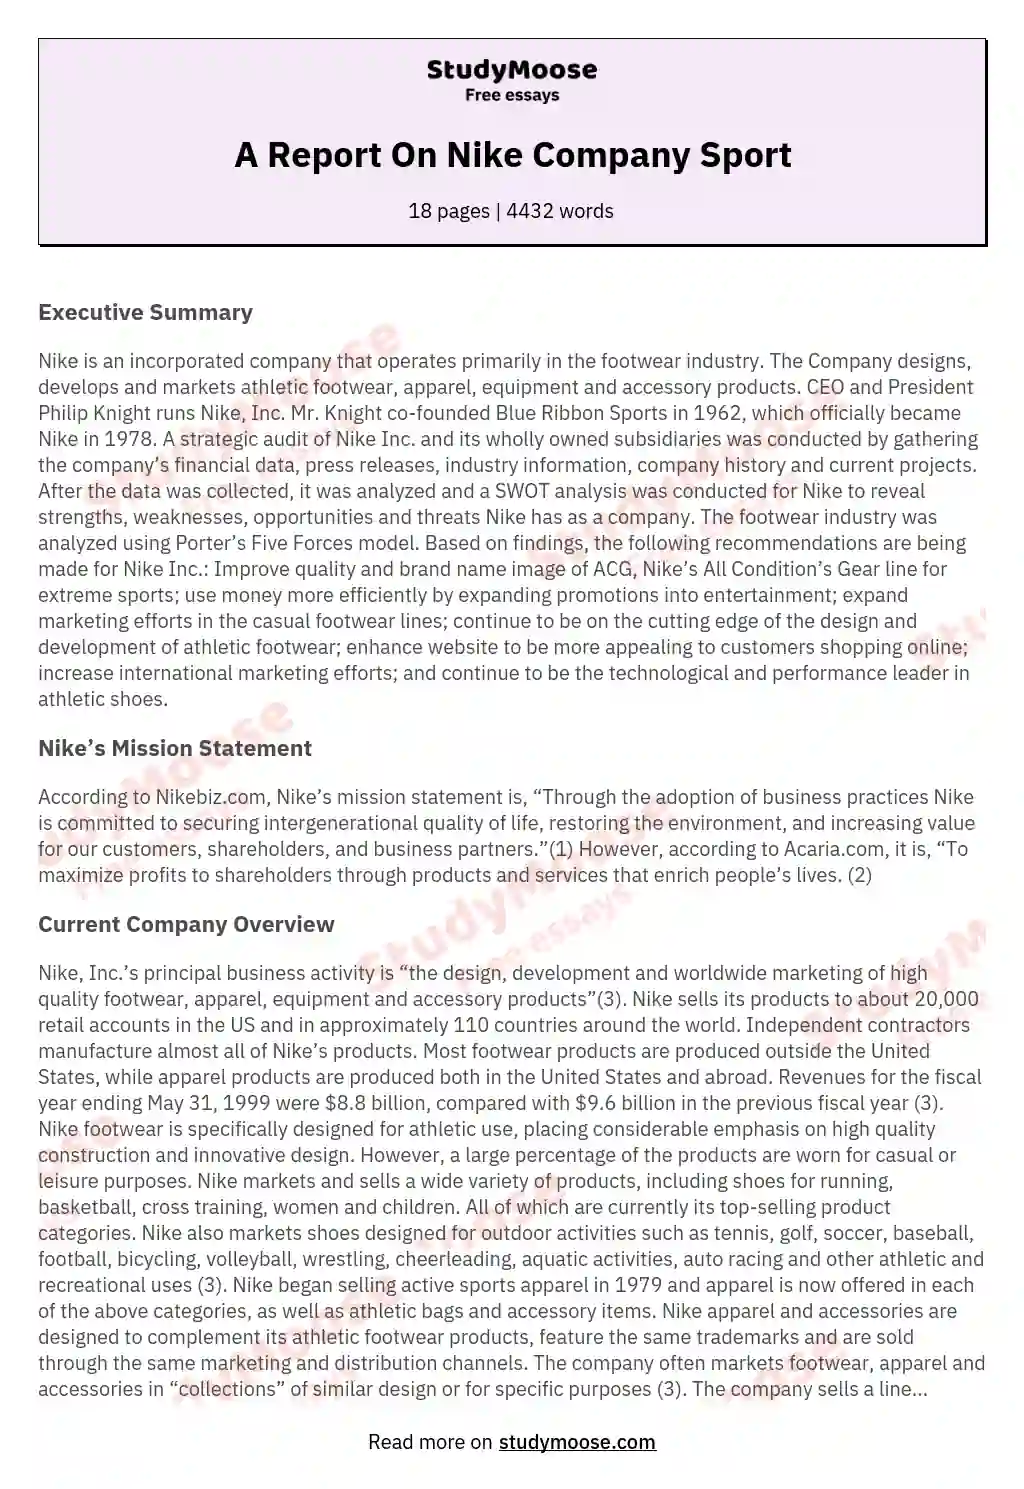 A Report On Nike Company Sport essay